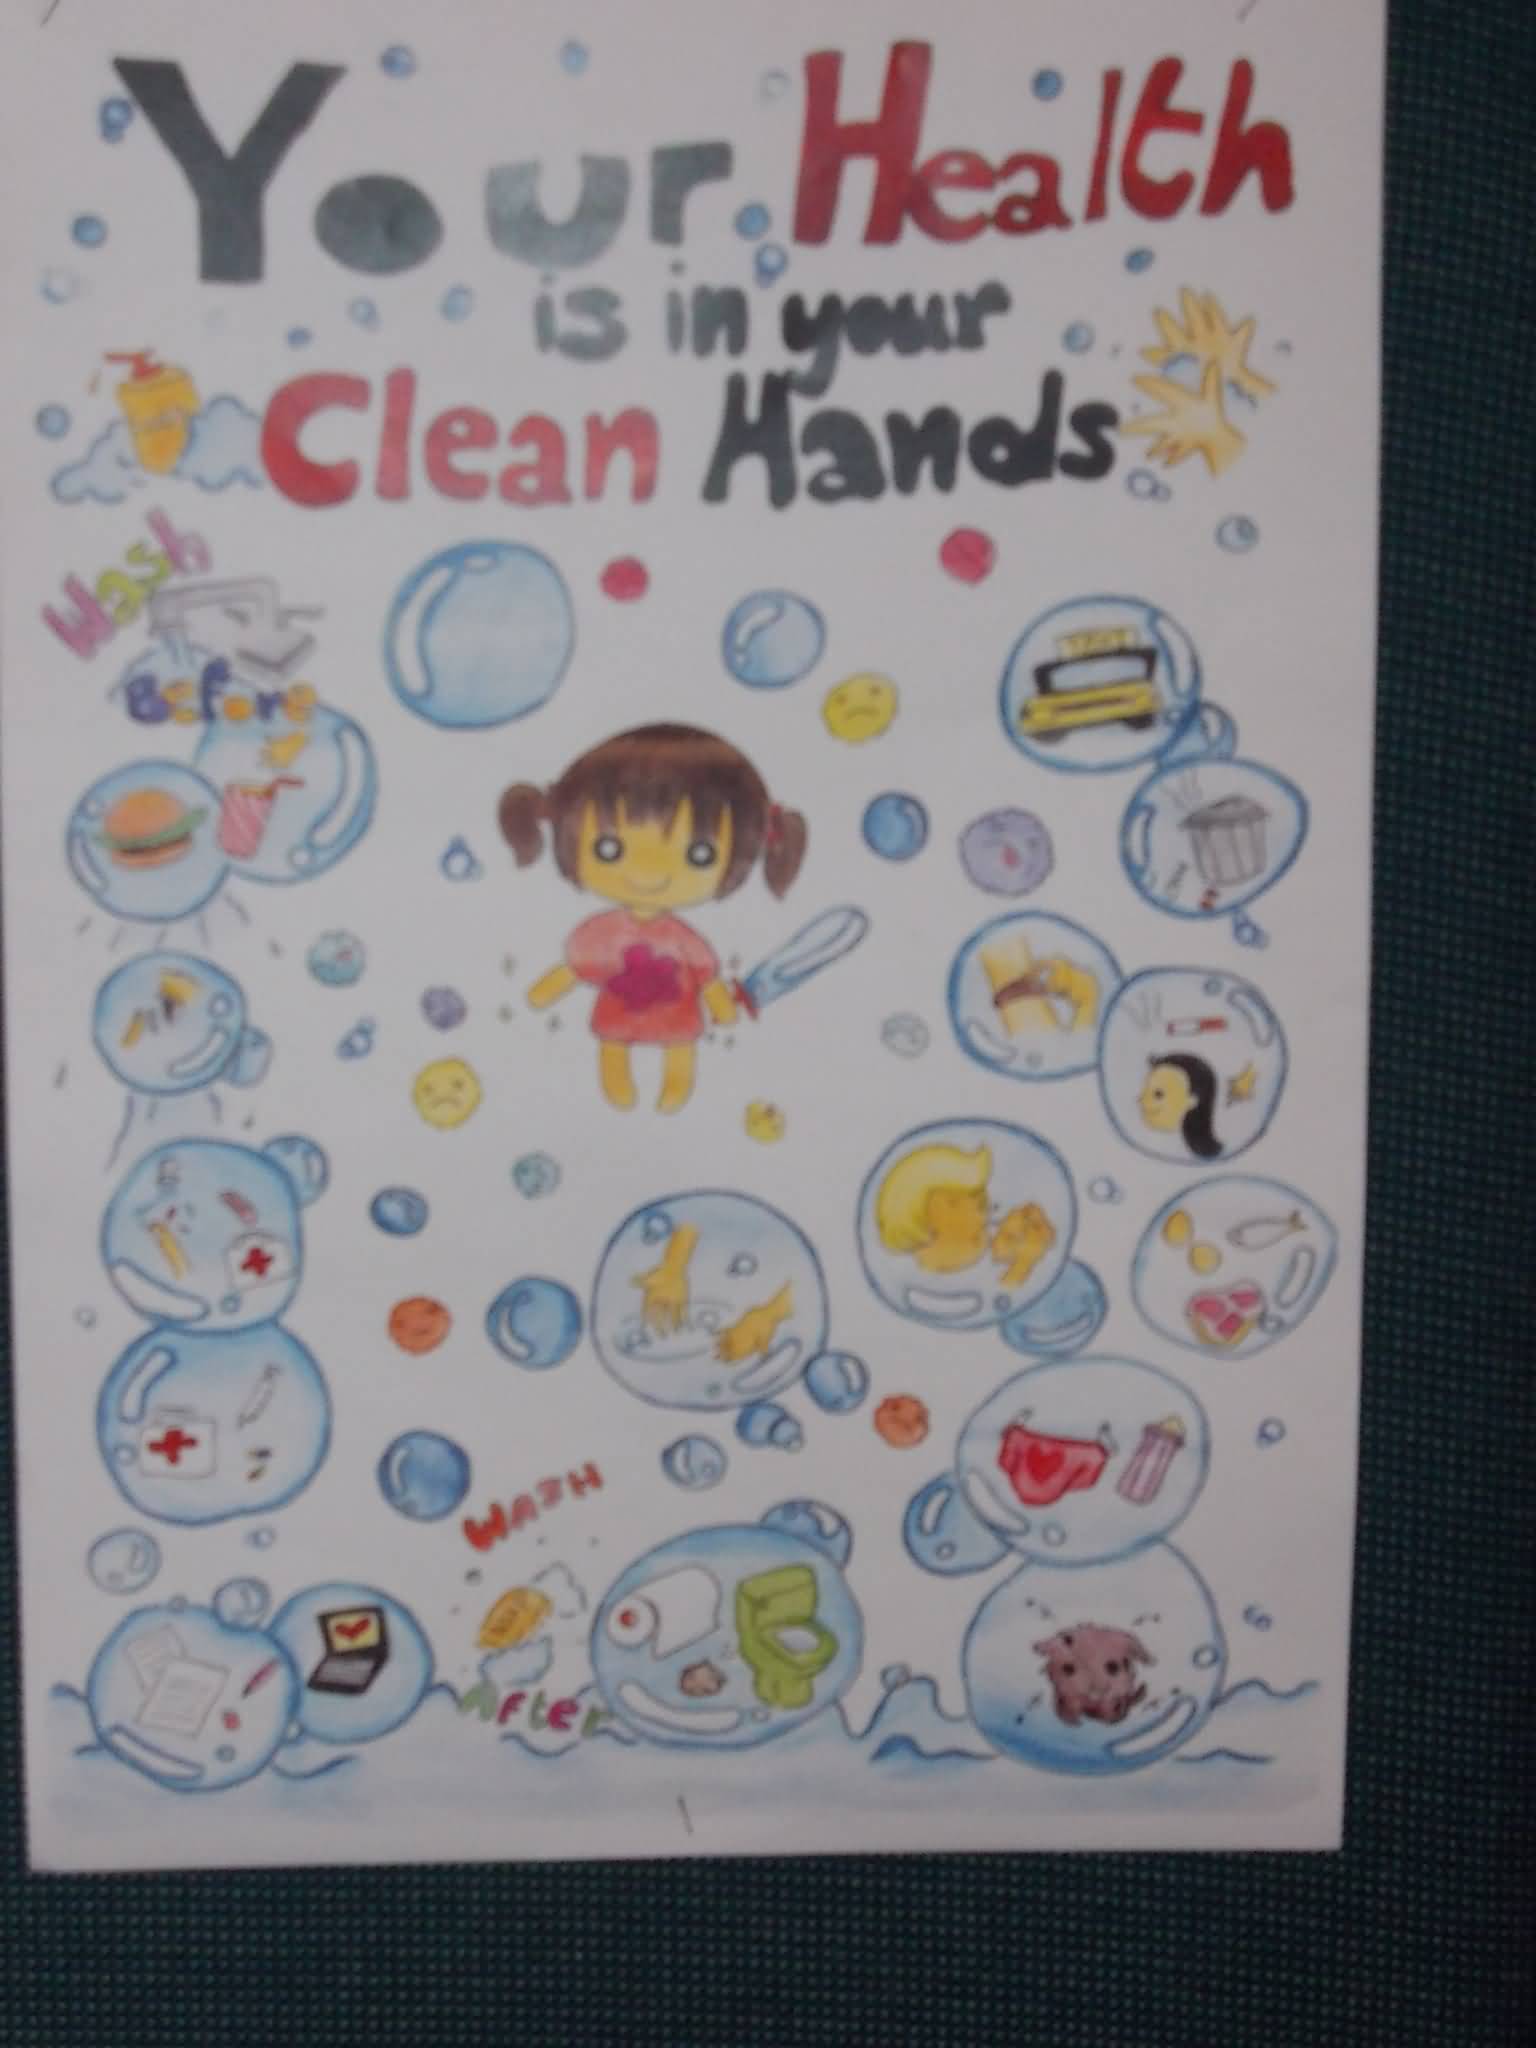 Your Health Is In Your Clean Hands Global Handwashing Day Poster